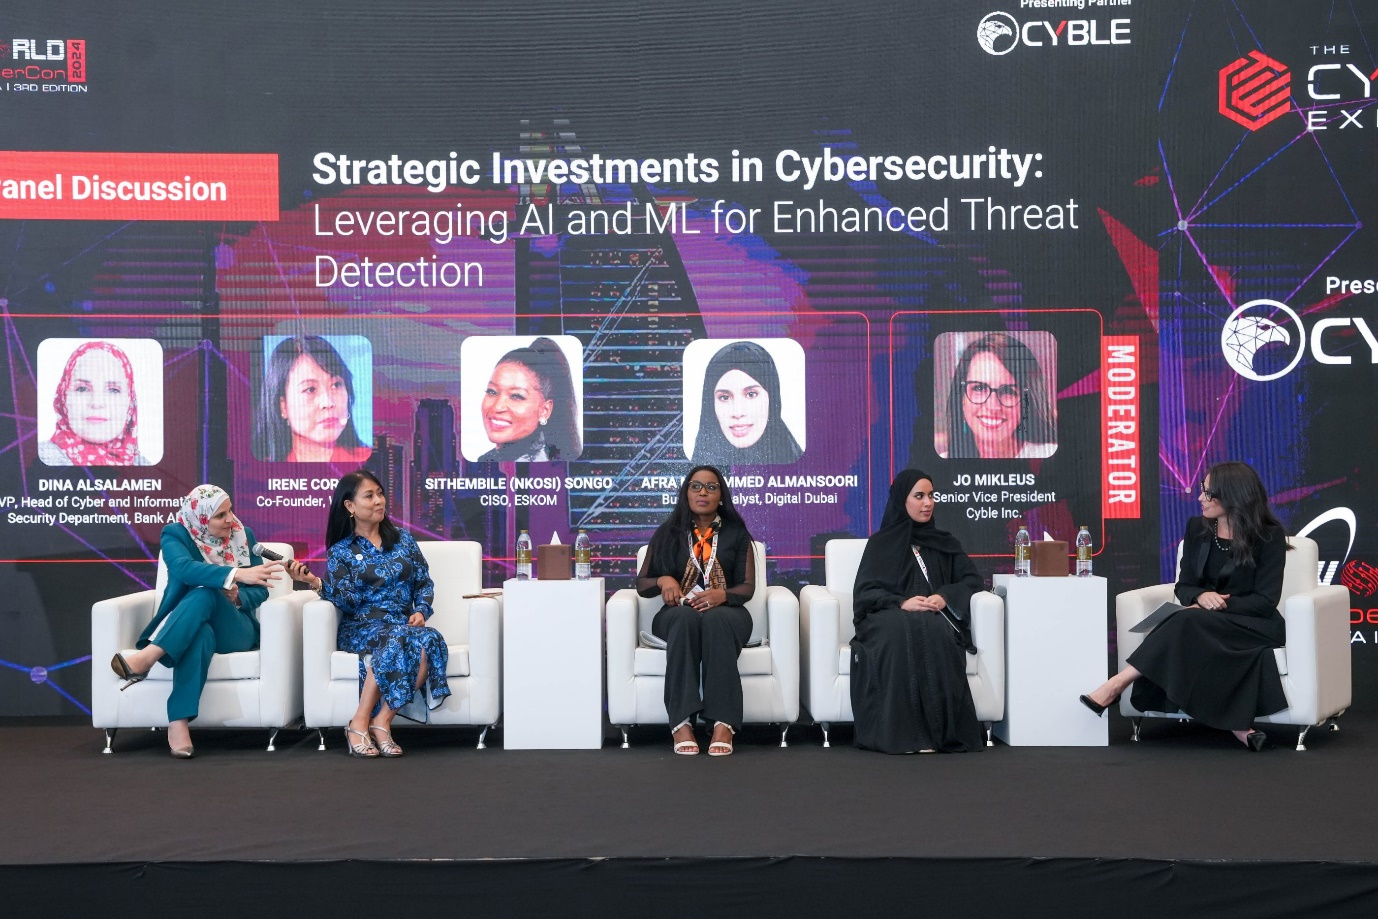 (L-R: Dina Alsalamen, VP, Head of Cyber and Information Security Department, Bank ABC; Irene Corpuz – Co-Founder, Women in Cyber Security Middle East; Sithembile (Nkosi) Songo – Chief Information Security Officer, ESKOM; Afra Mohammed Almansoori – Business Analyst, Digital  Dubai and Jo Mikleus – Senior Vice President, Cyble Inc